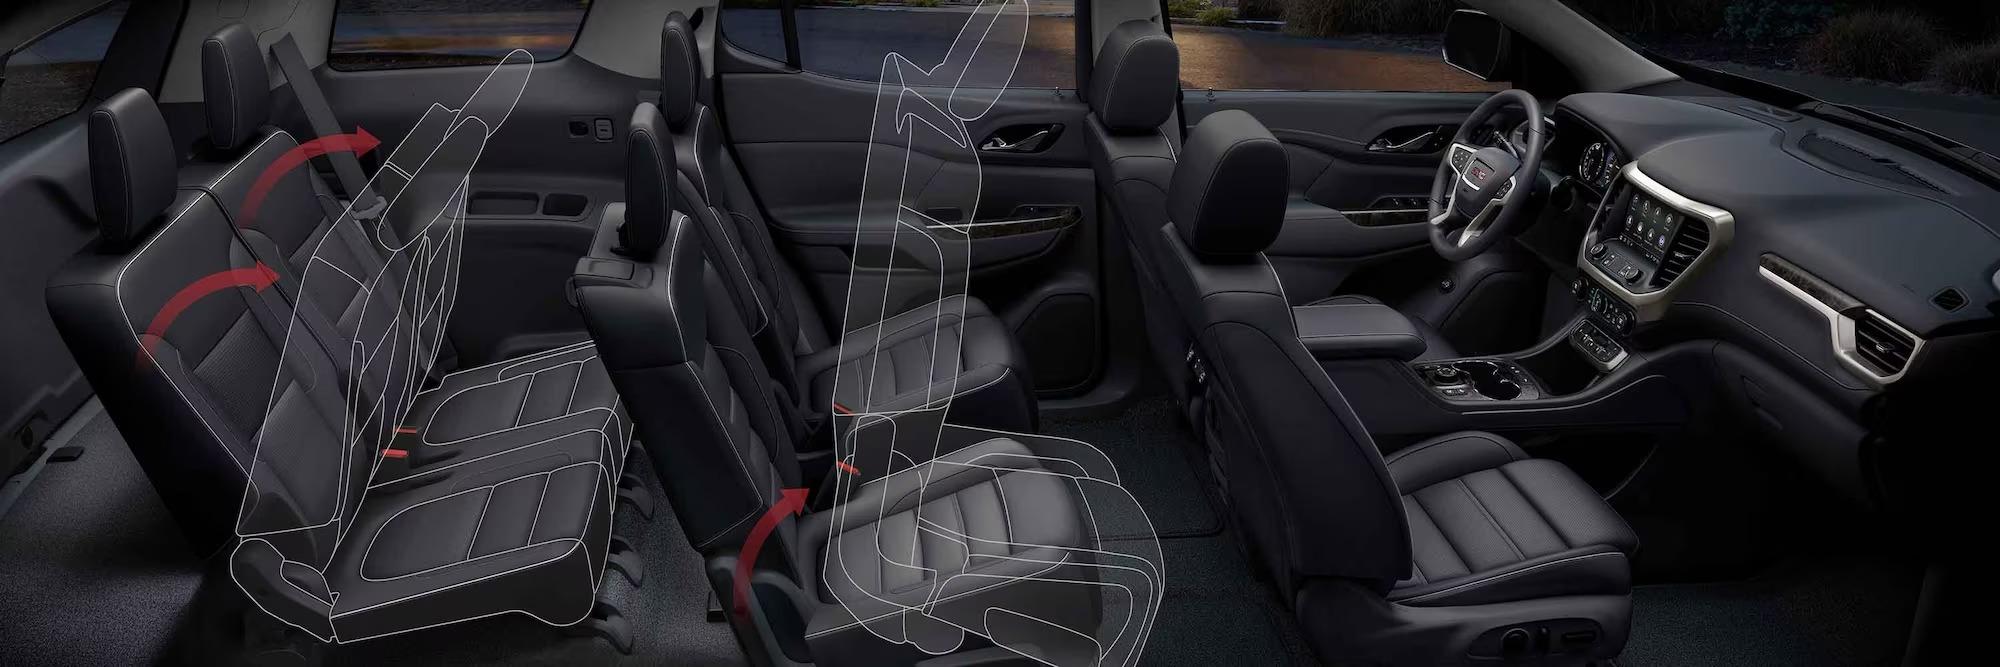 The flexibility of second- and third-row fold-flat seating and Smart Slide second-row seats offers adaptability for an ever-changing agenda in this mid-size SUV.